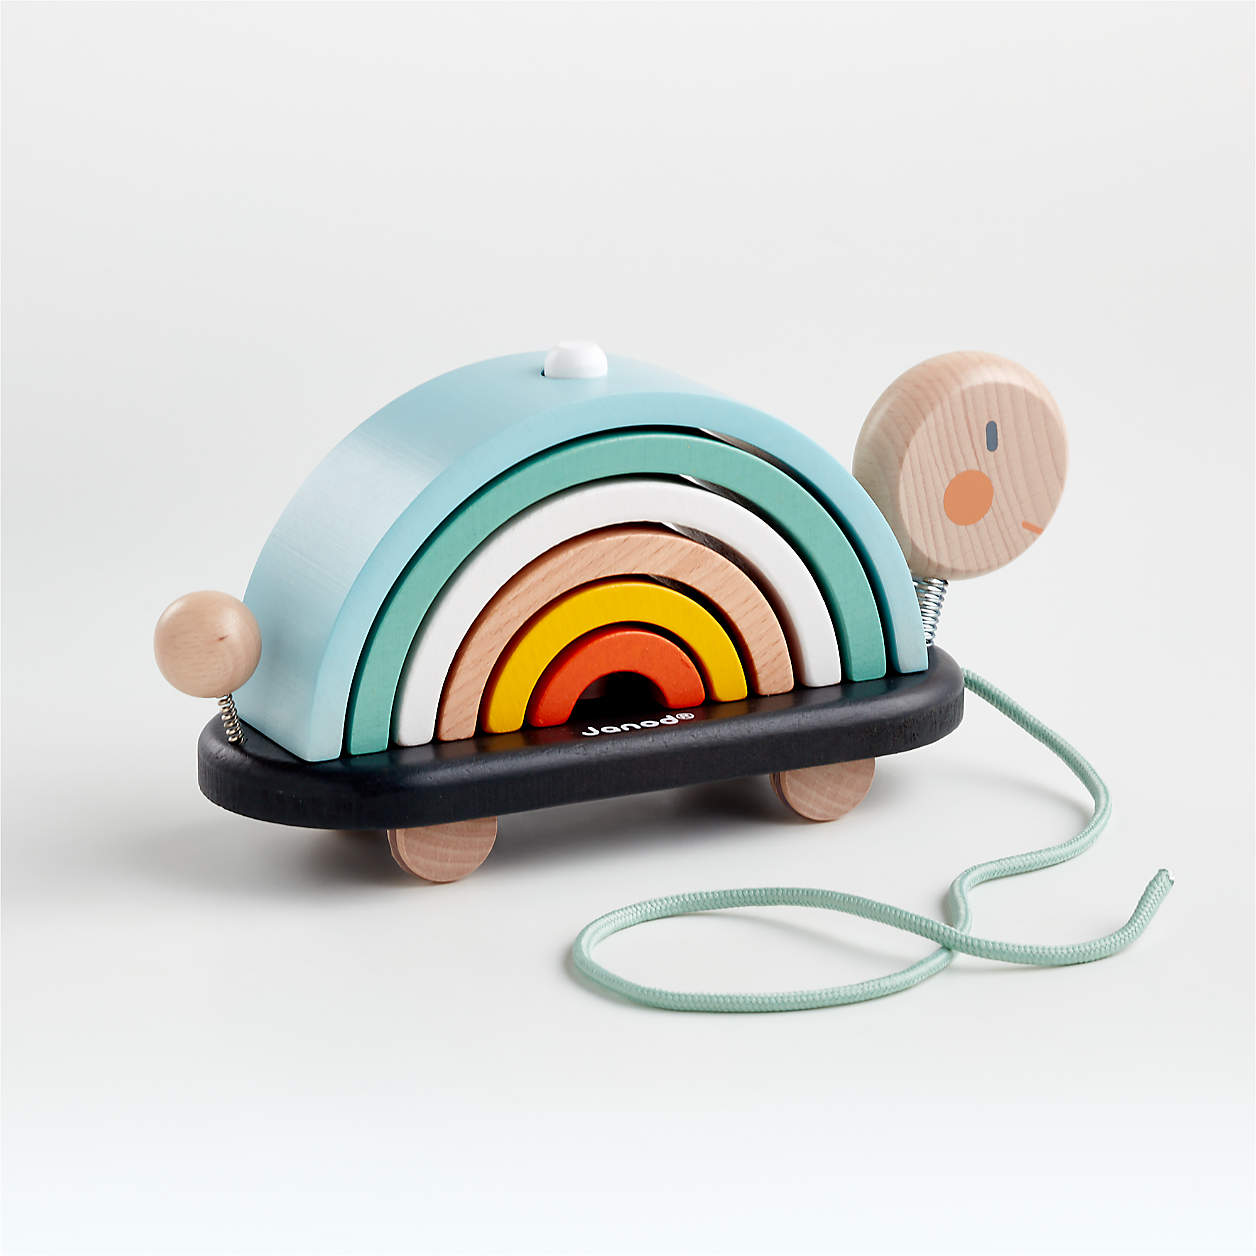 wooden turtle with rainbow shaped wooden pieces cocooned together to form the back of the turtle on a pully string